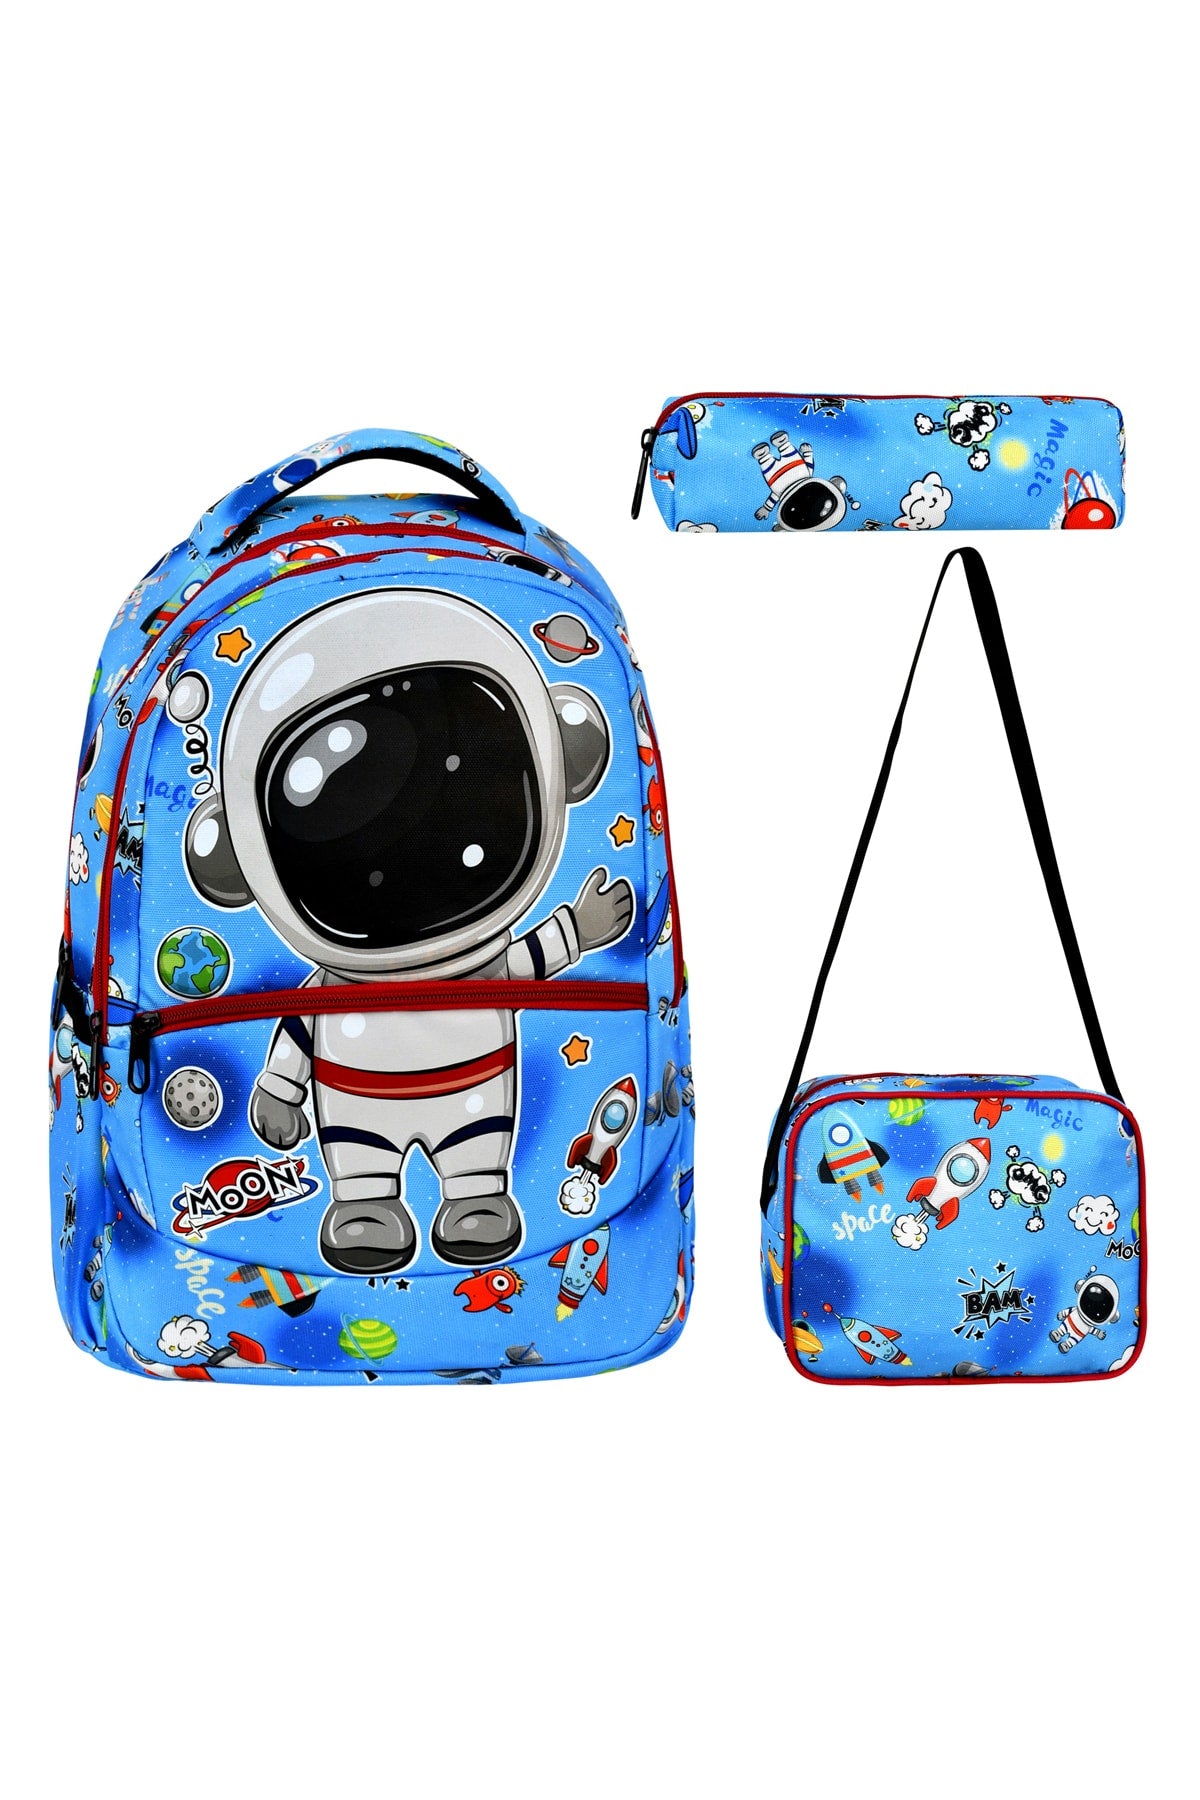 3-pack Elementary School Astronaut Patterned School Bag with Food and Pencil Holder for Boys